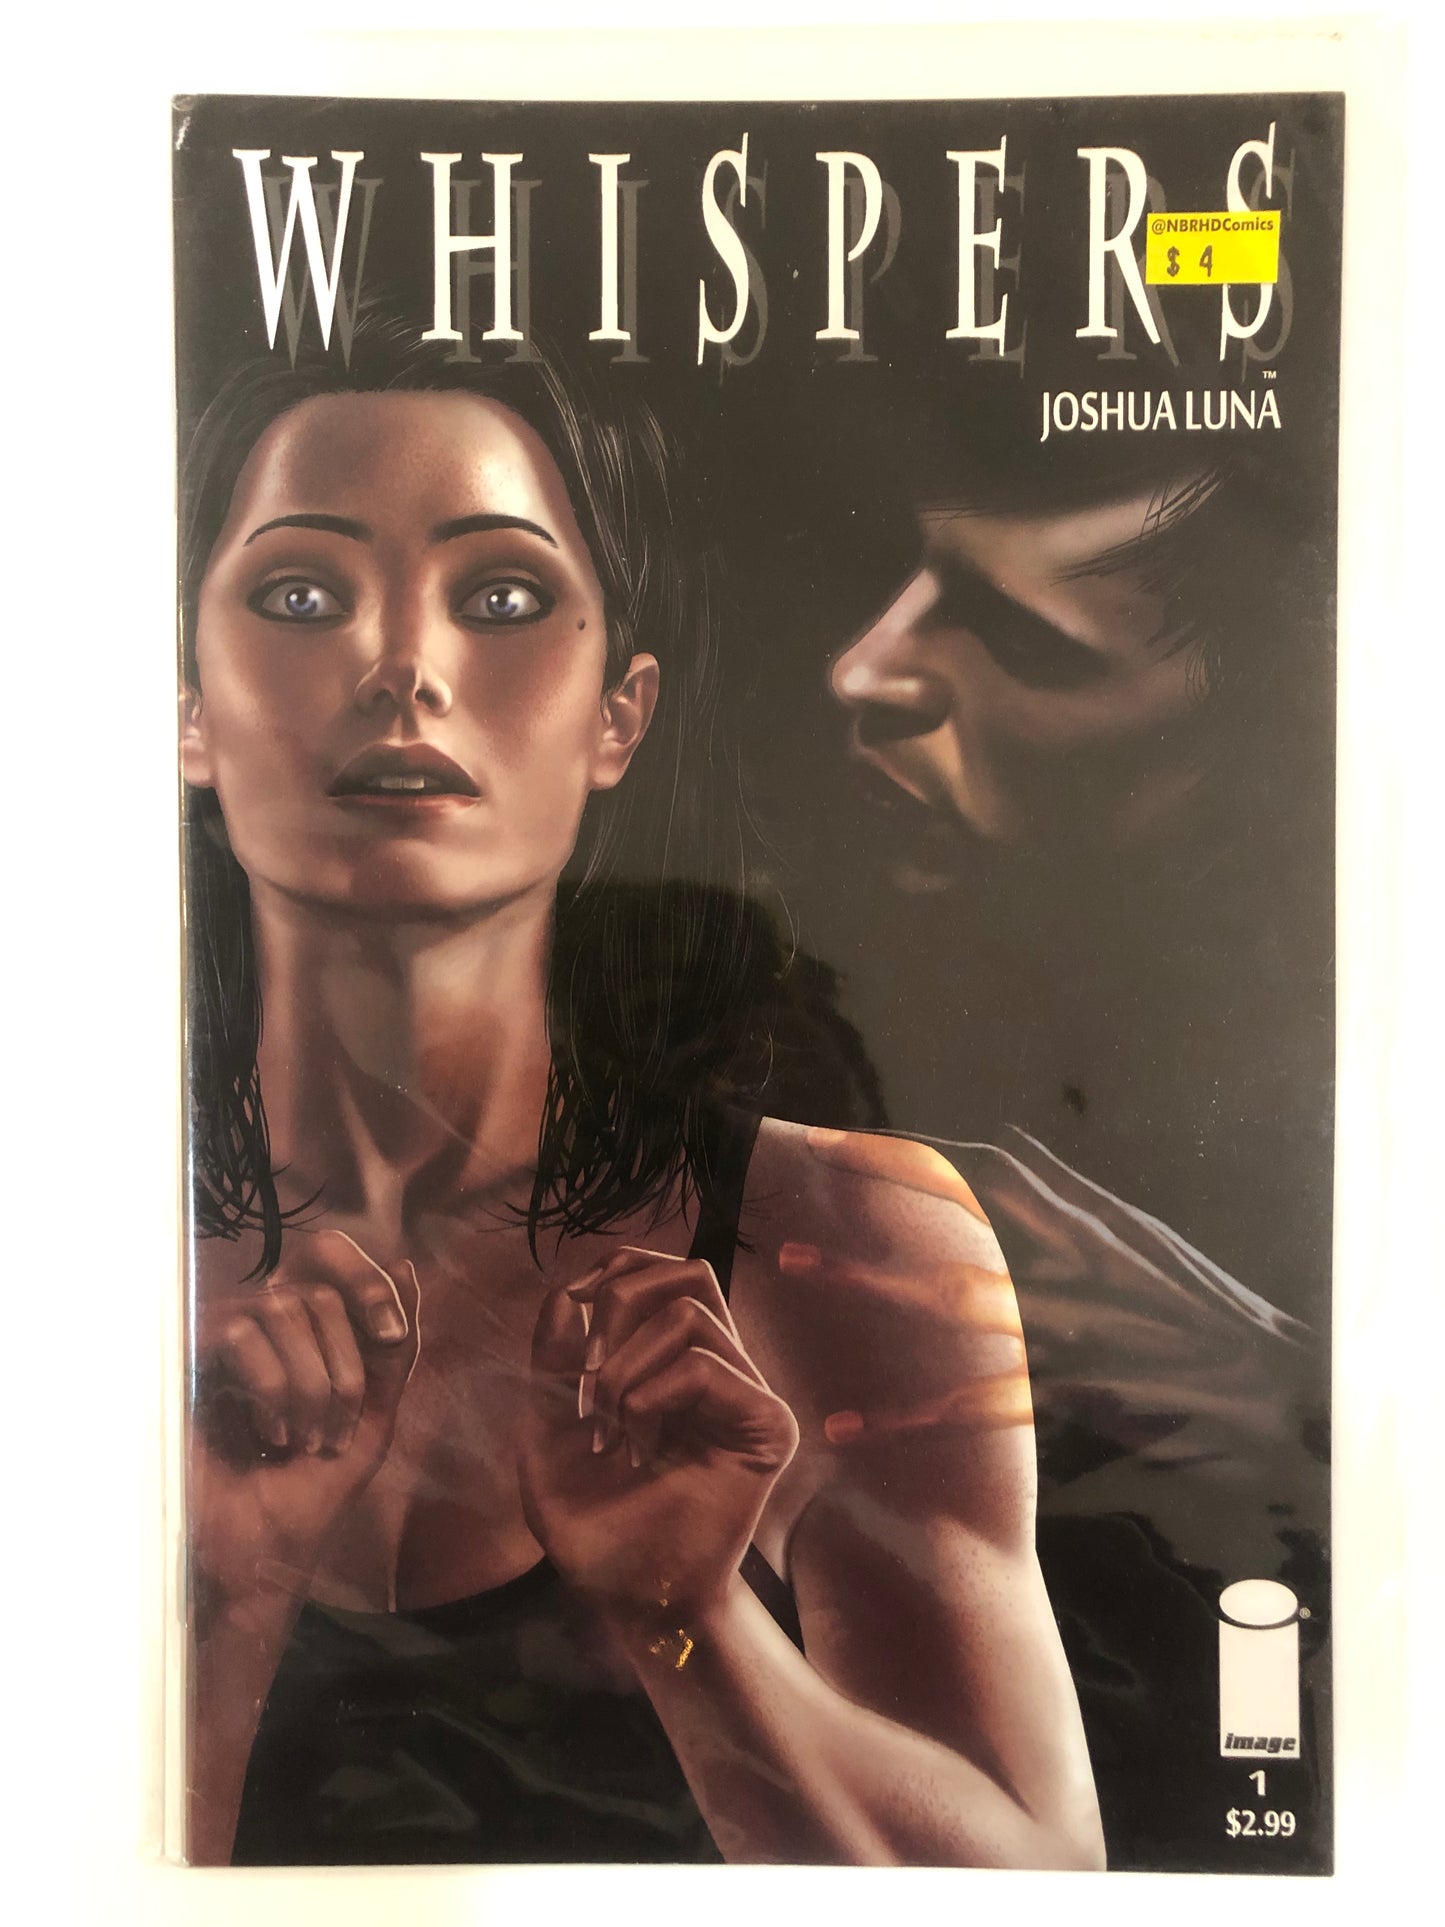 Whispers #1